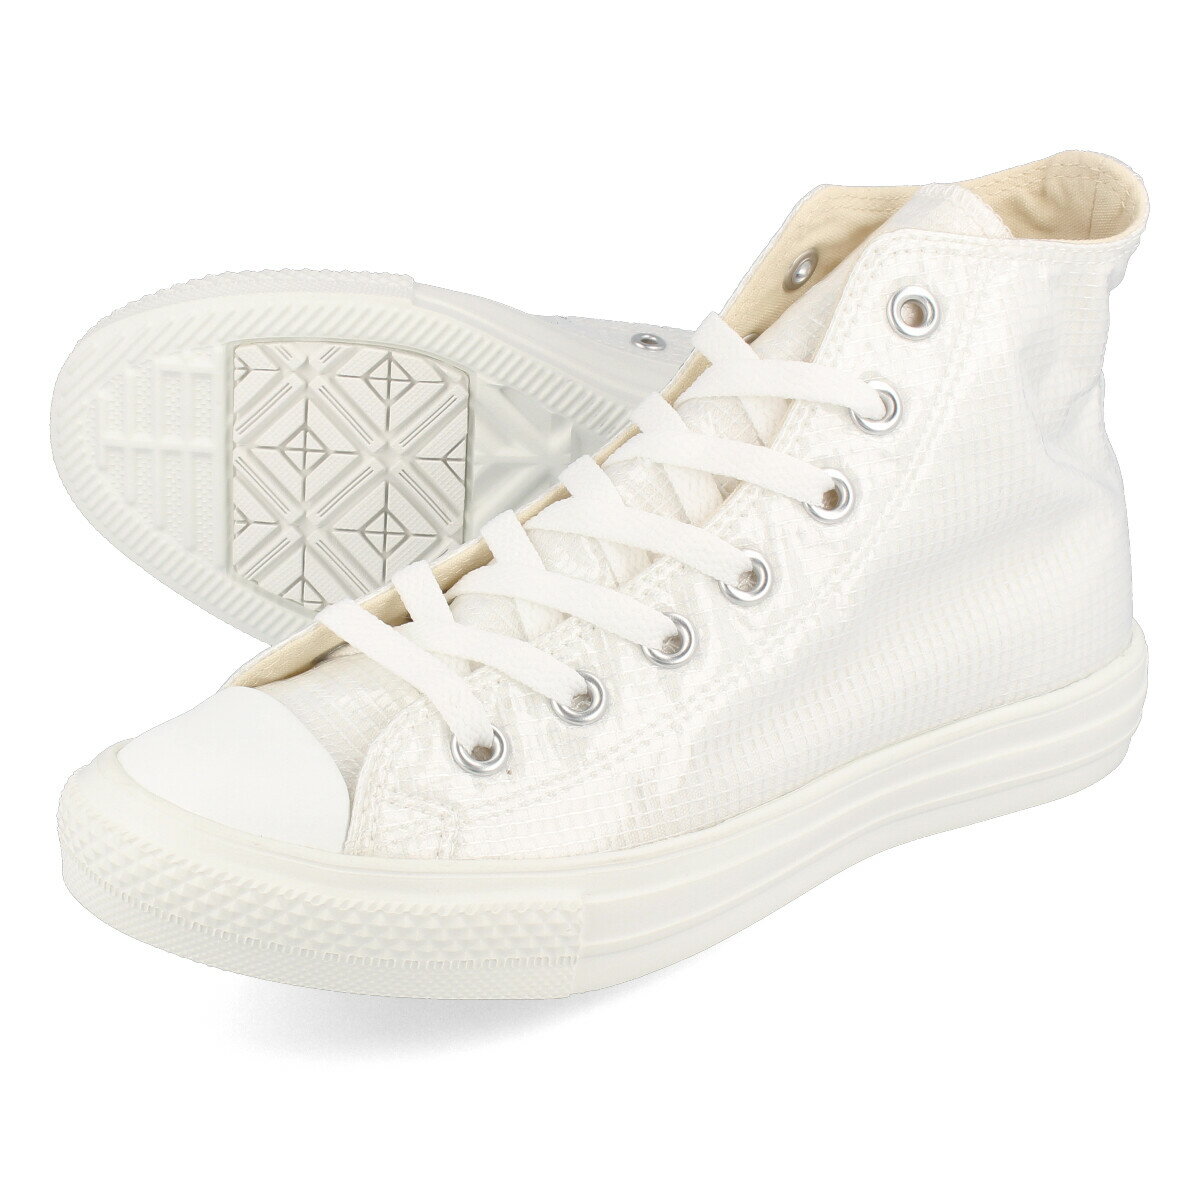 CONVERSE ALL STAR LIGHT CLEARLAYER HI コンバース オールスター ライト クリアレイヤー ハイ WHITE 31303661